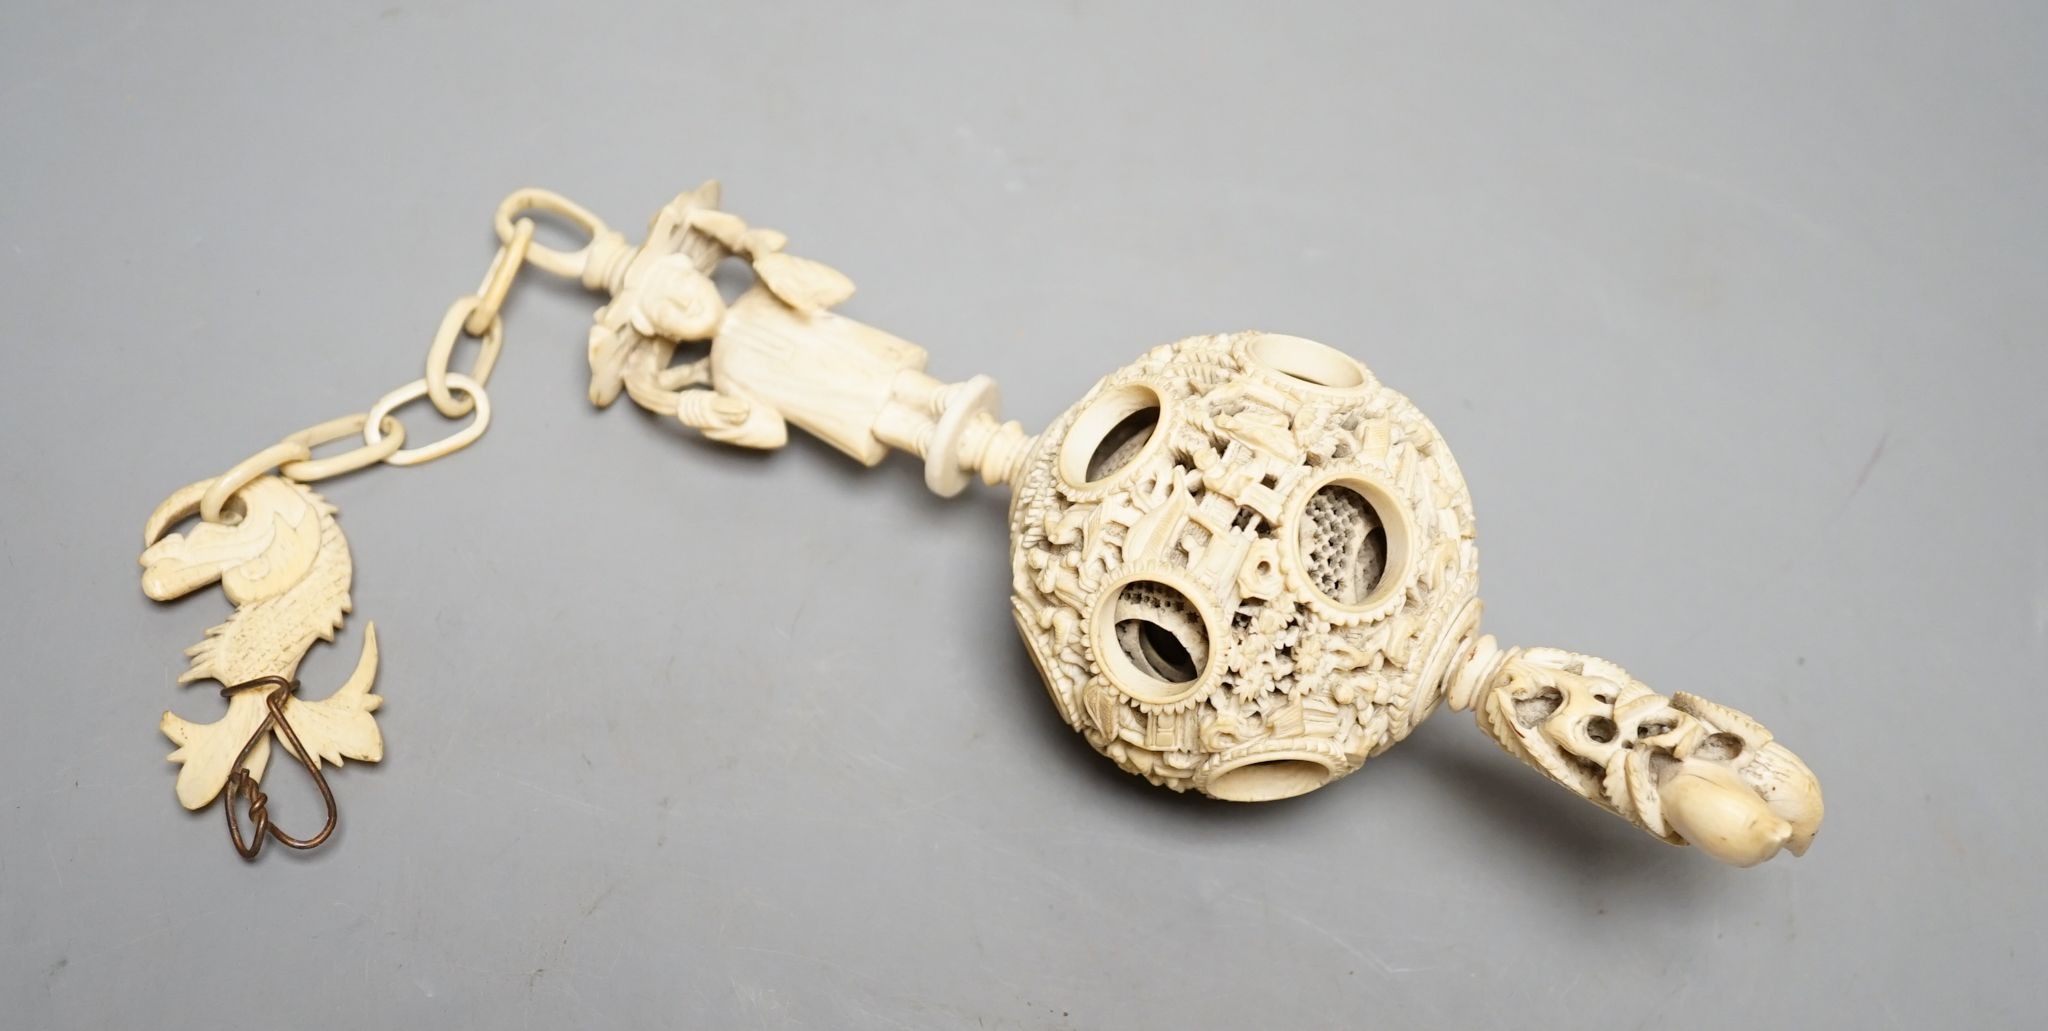 A 19th century Chinese export ivory puzzle ball., 31 cms long including chain.